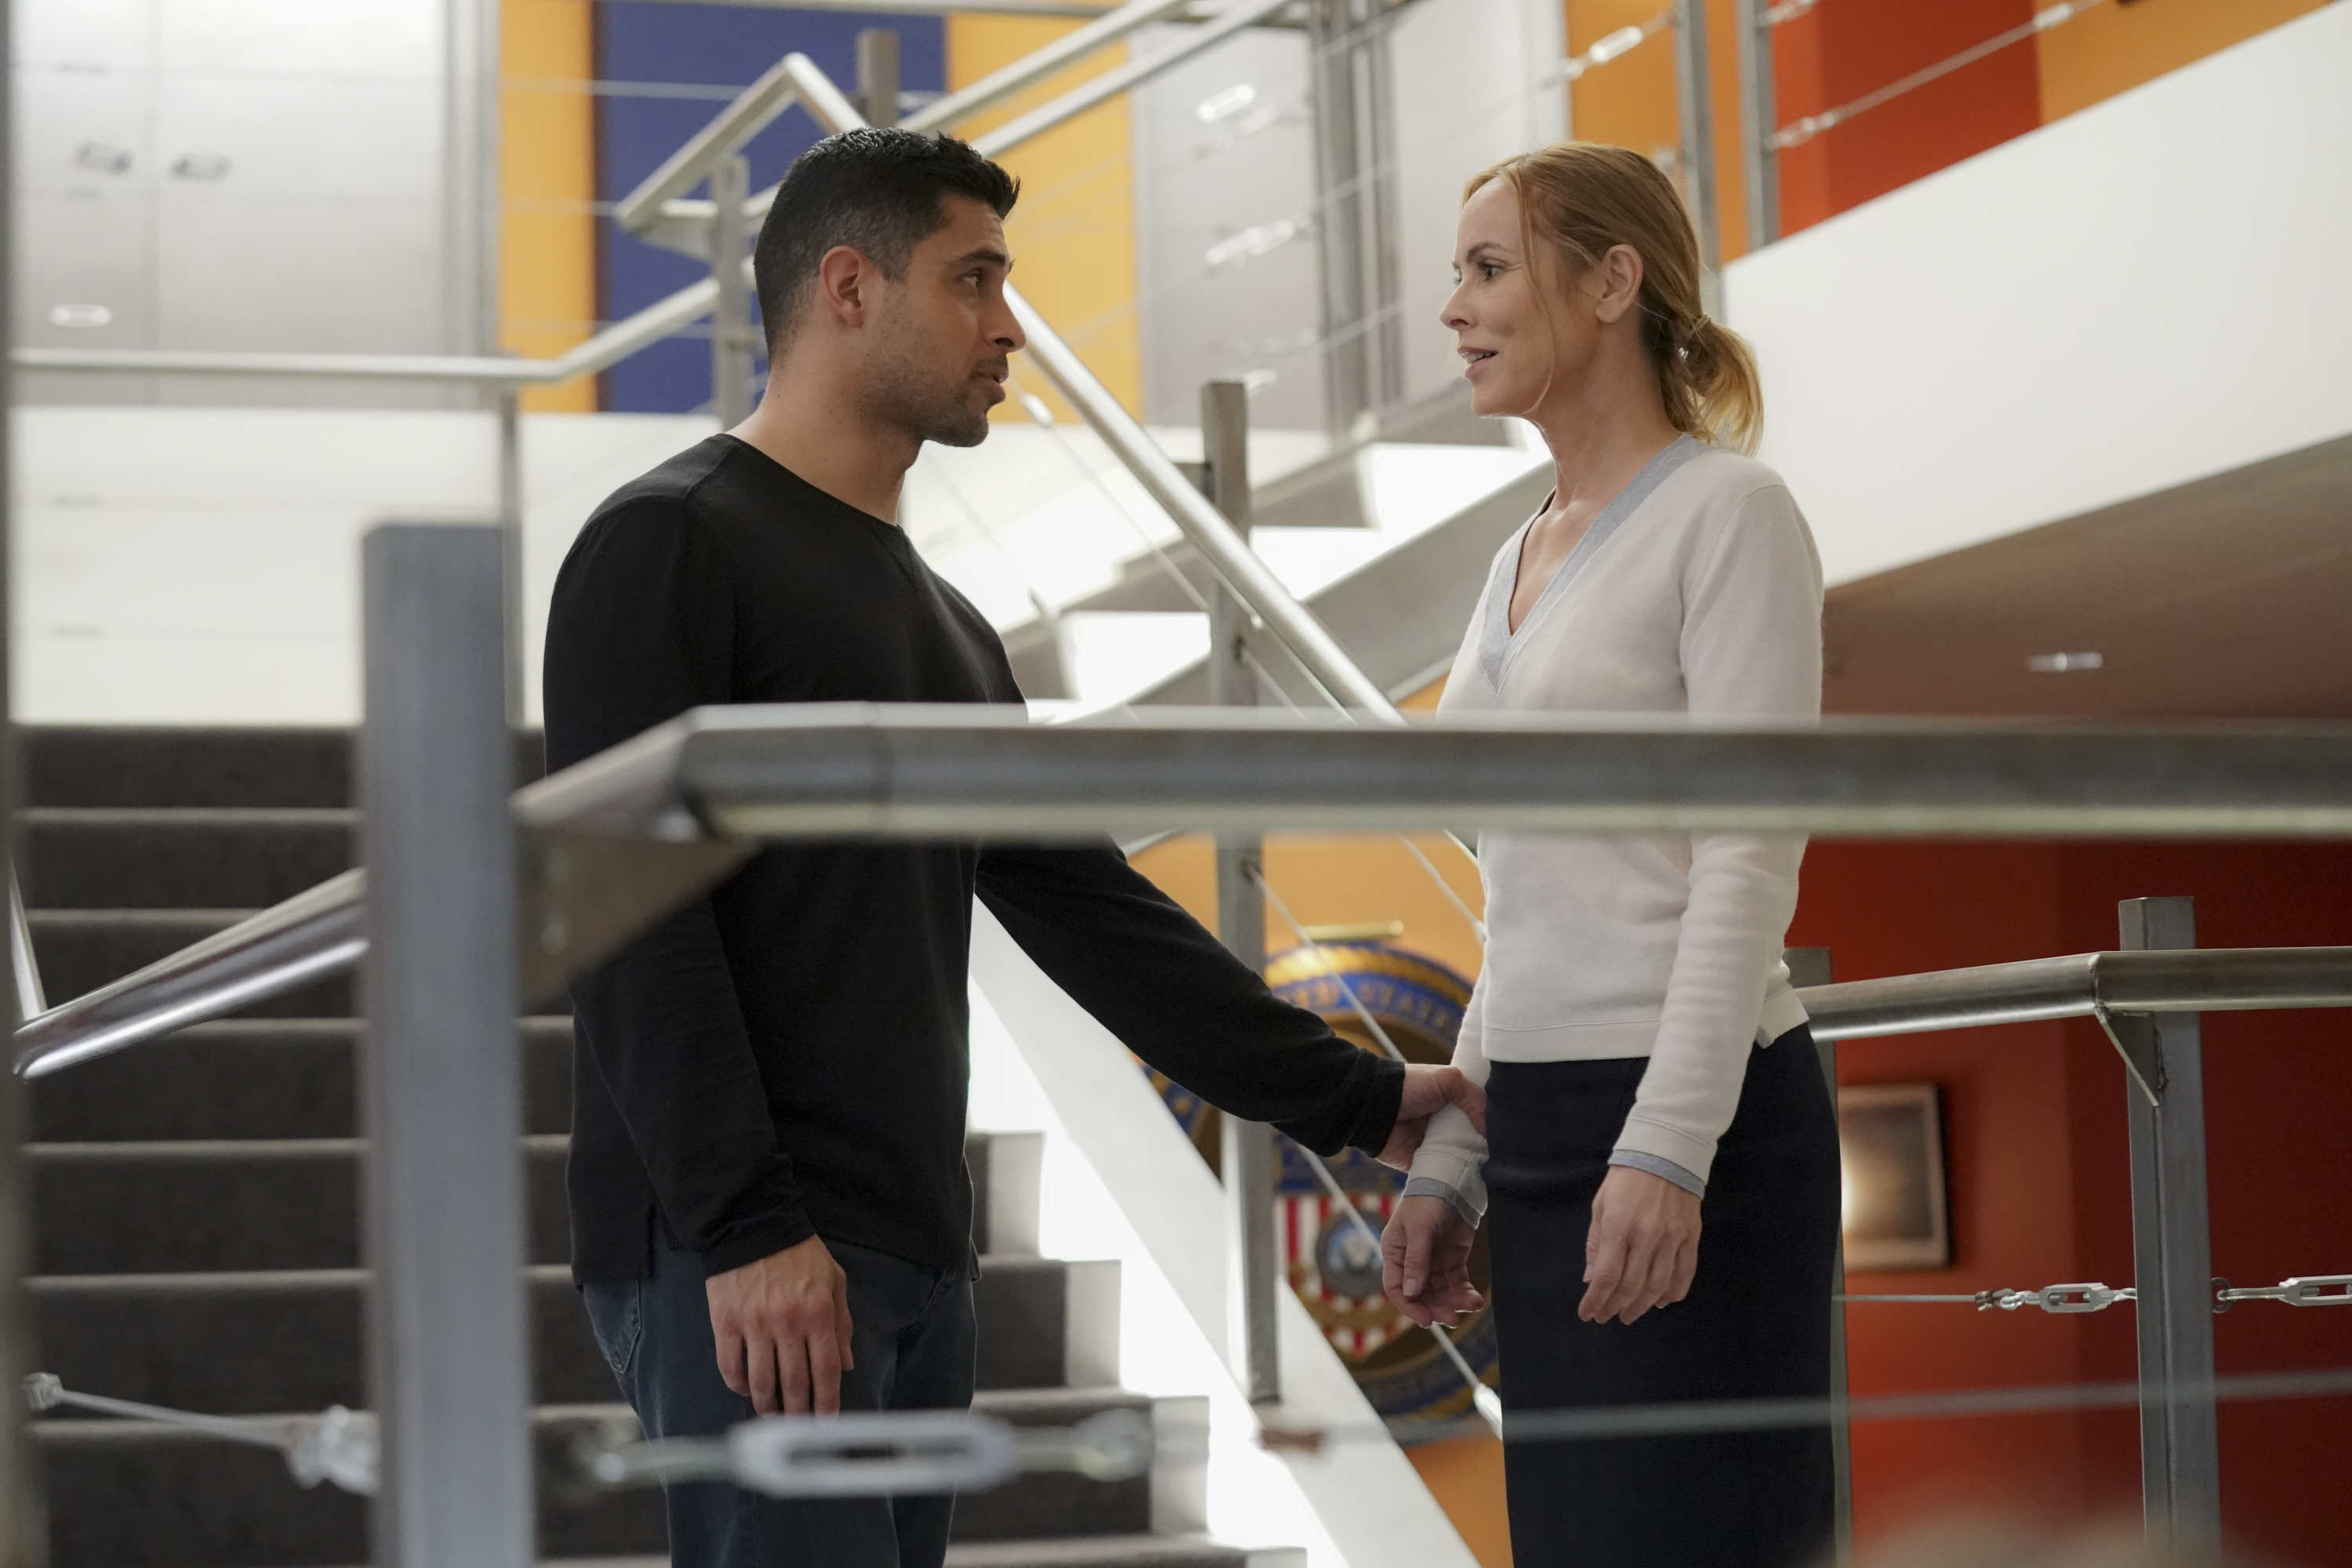 NCIS stars Wilmer Valderrama and Maria Bello filming "Mona Lisa" - Torres relies on his team's investigative skills after he wakes up on a dilapidated fishing boat, covered in blood and unable to remember the last 12 hours, on NCIS Tuesday, April 2 